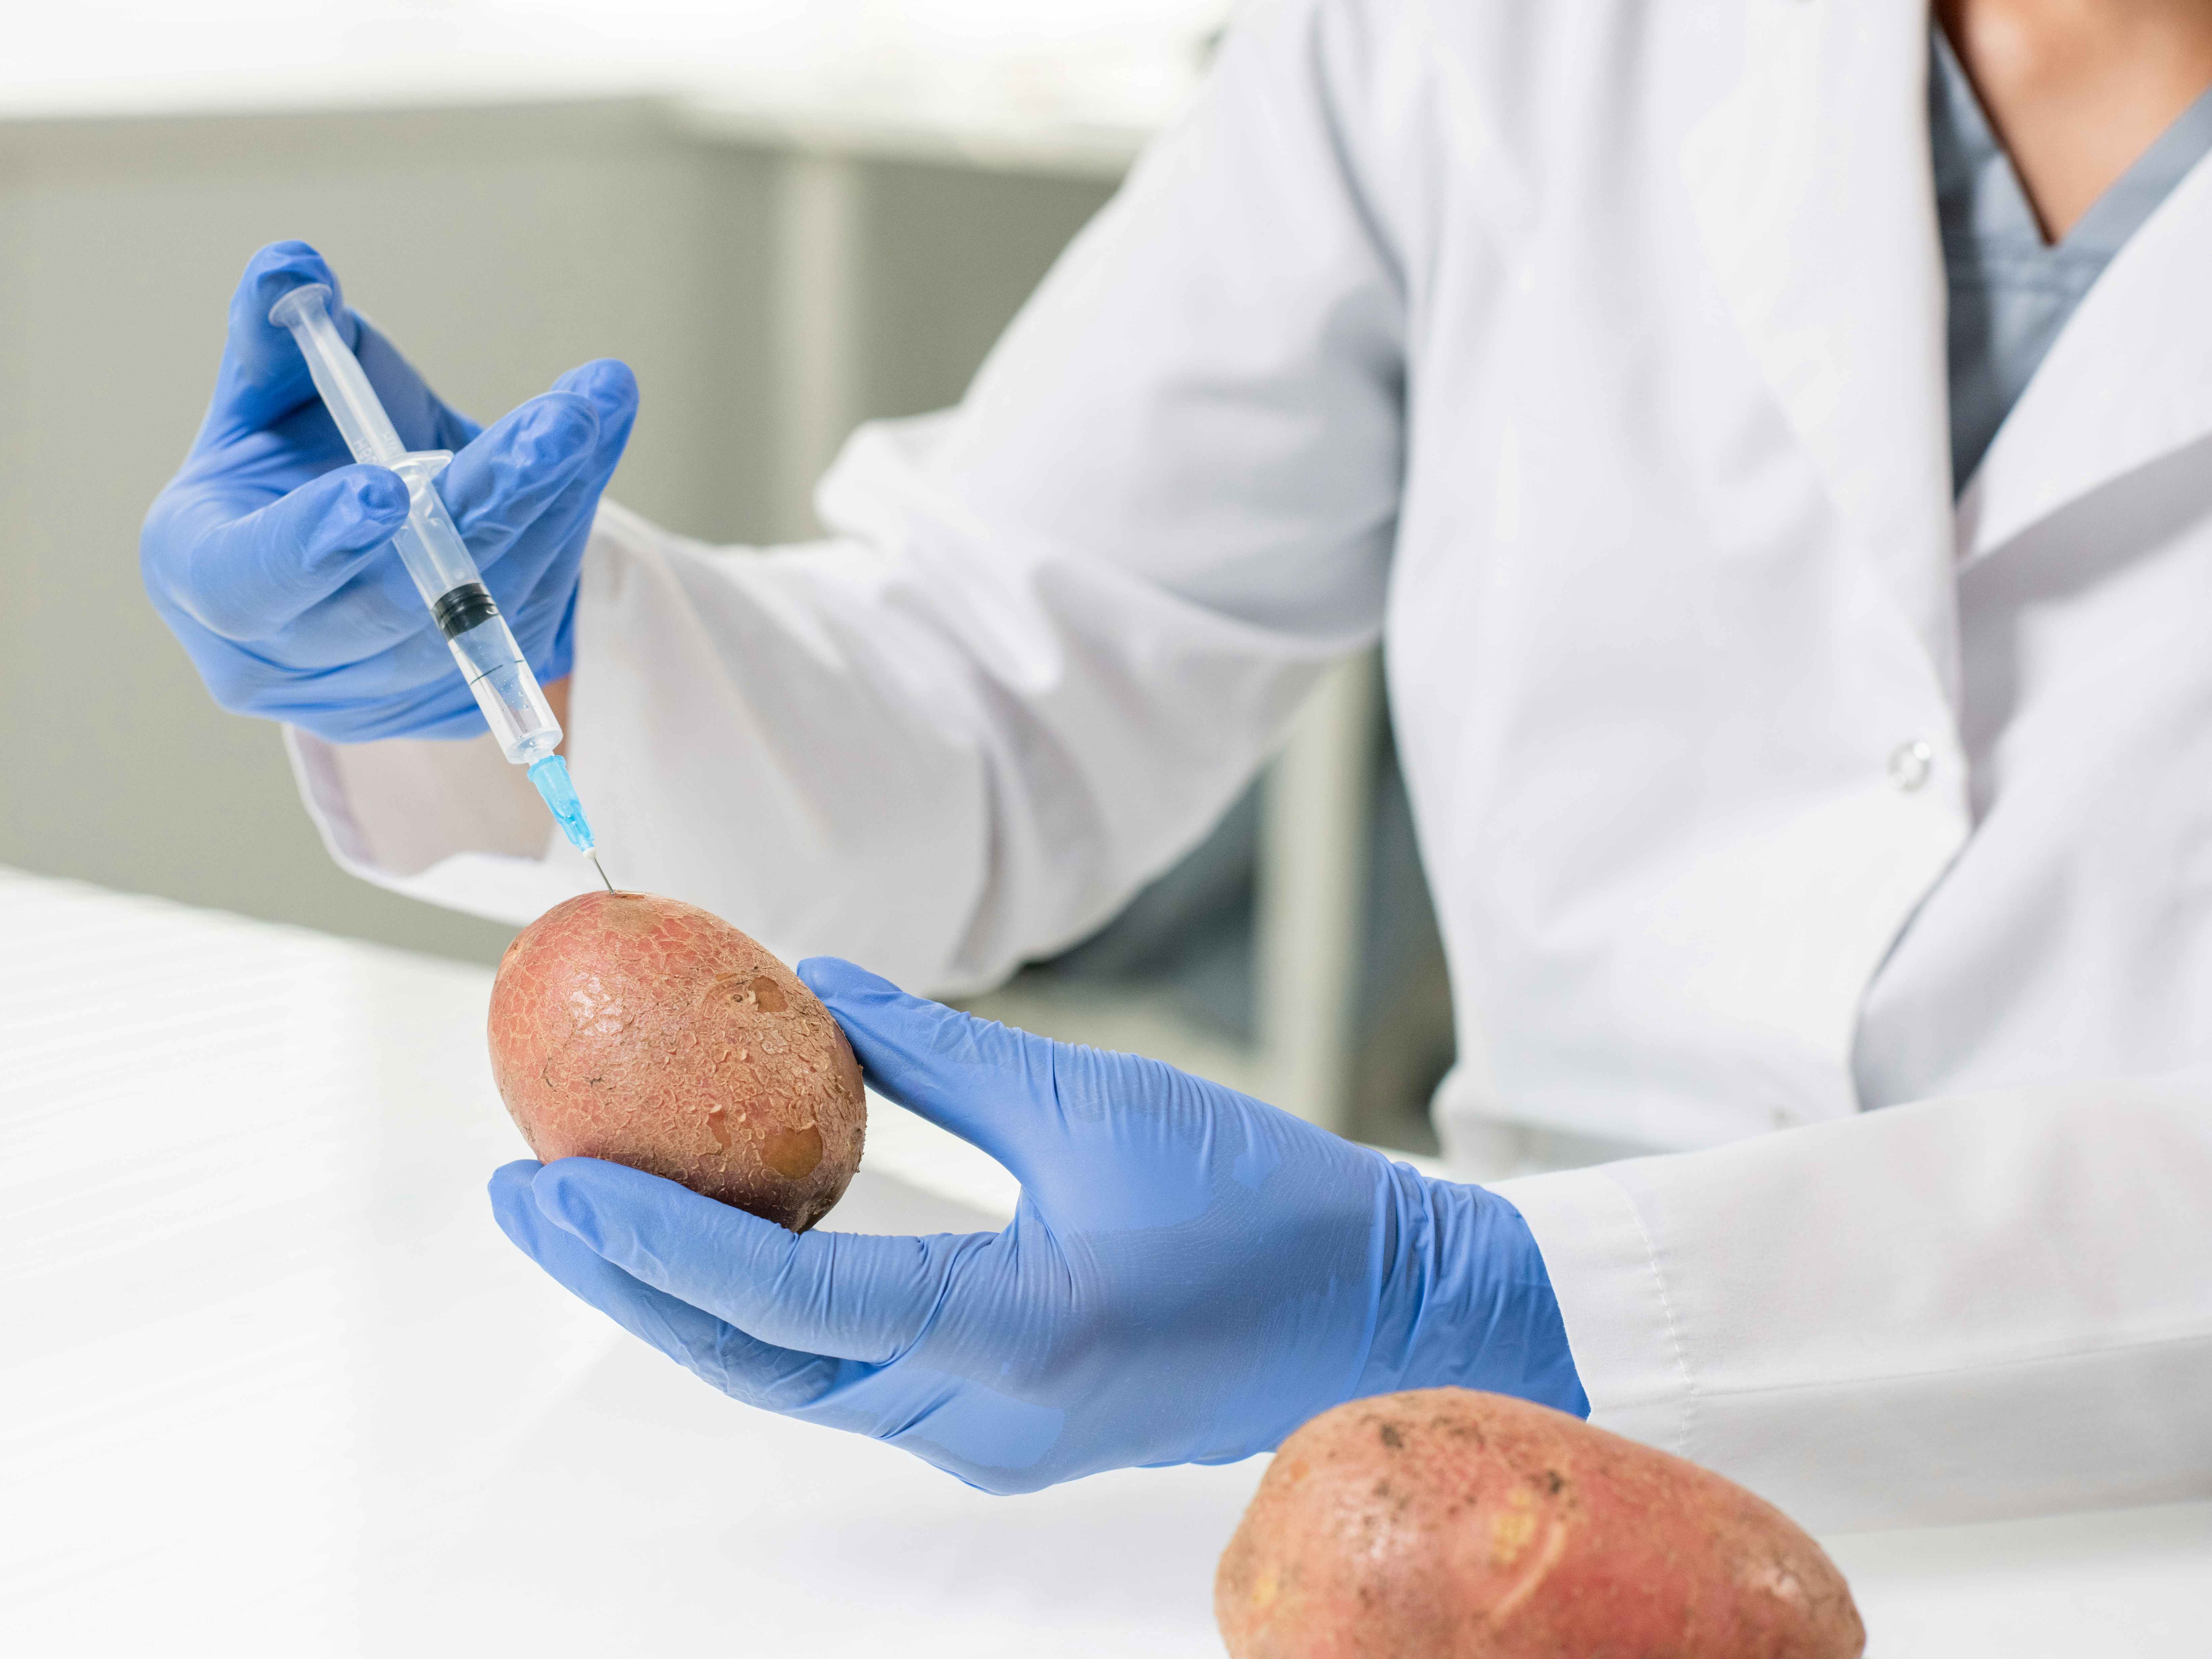 Researcher in a white coat and gloves injecting a potato